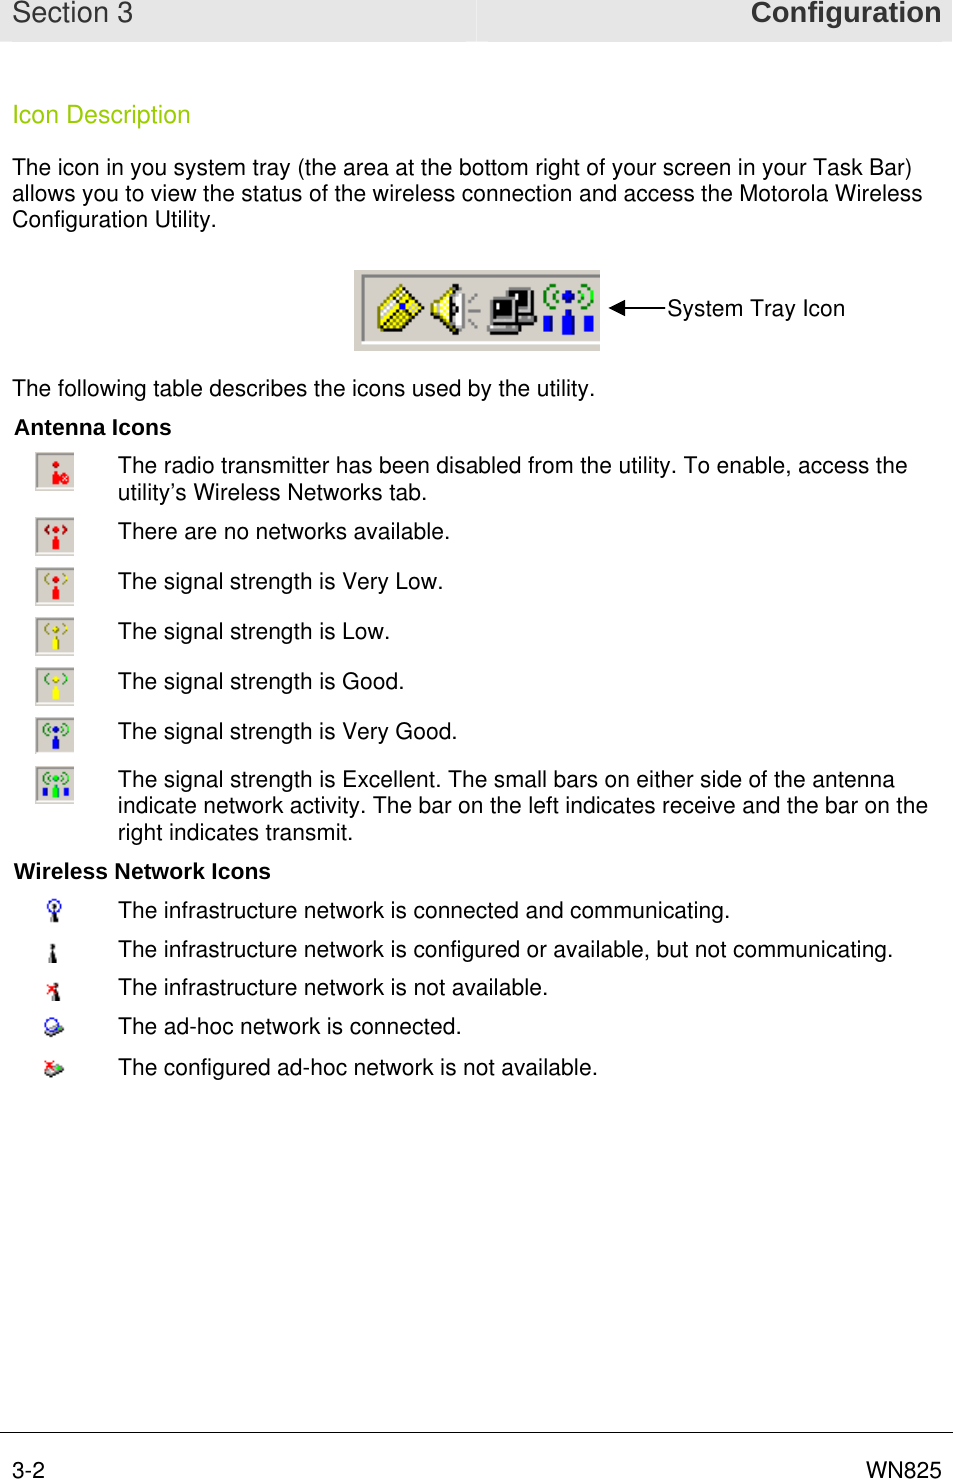 Section 3  Configuration 3-2      WN825Icon Description The icon in you system tray (the area at the bottom right of your screen in your Task Bar) allows you to view the status of the wireless connection and access the Motorola Wireless Configuration Utility.  System Tray Icon The following table describes the icons used by the utility. Antenna Icons  The radio transmitter has been disabled from the utility. To enable, access the utility’s Wireless Networks tab.  There are no networks available.  The signal strength is Very Low.  The signal strength is Low.  The signal strength is Good.  The signal strength is Very Good.  The signal strength is Excellent. The small bars on either side of the antenna indicate network activity. The bar on the left indicates receive and the bar on the right indicates transmit. Wireless Network Icons  The infrastructure network is connected and communicating.  The infrastructure network is configured or available, but not communicating.  The infrastructure network is not available.  The ad-hoc network is connected.  The configured ad-hoc network is not available.   